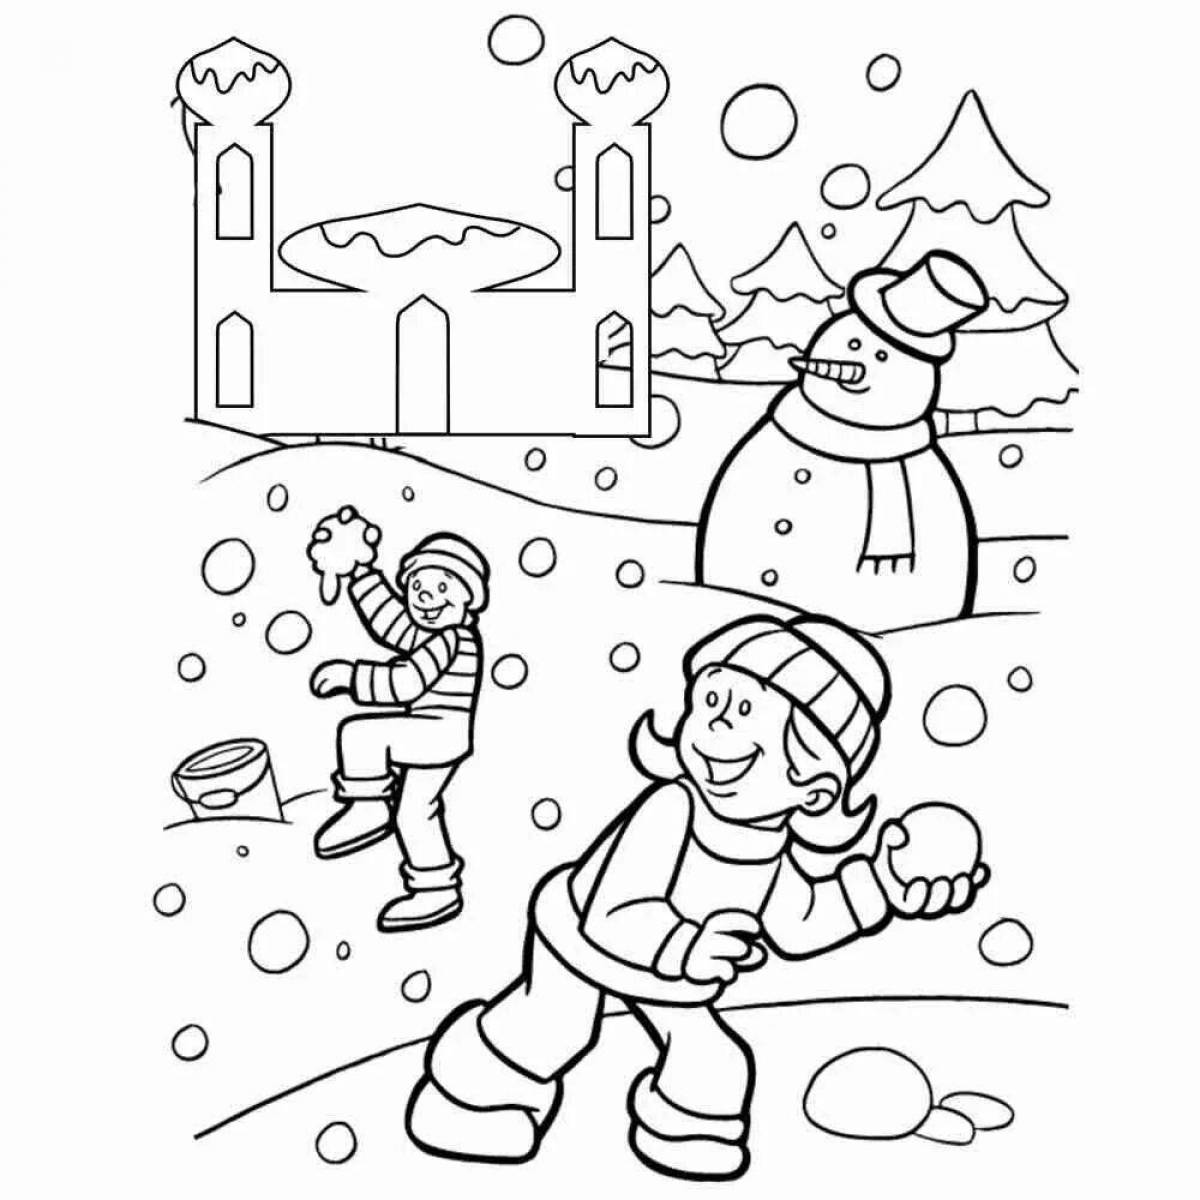 Blissful coloring for children outdoors in winter